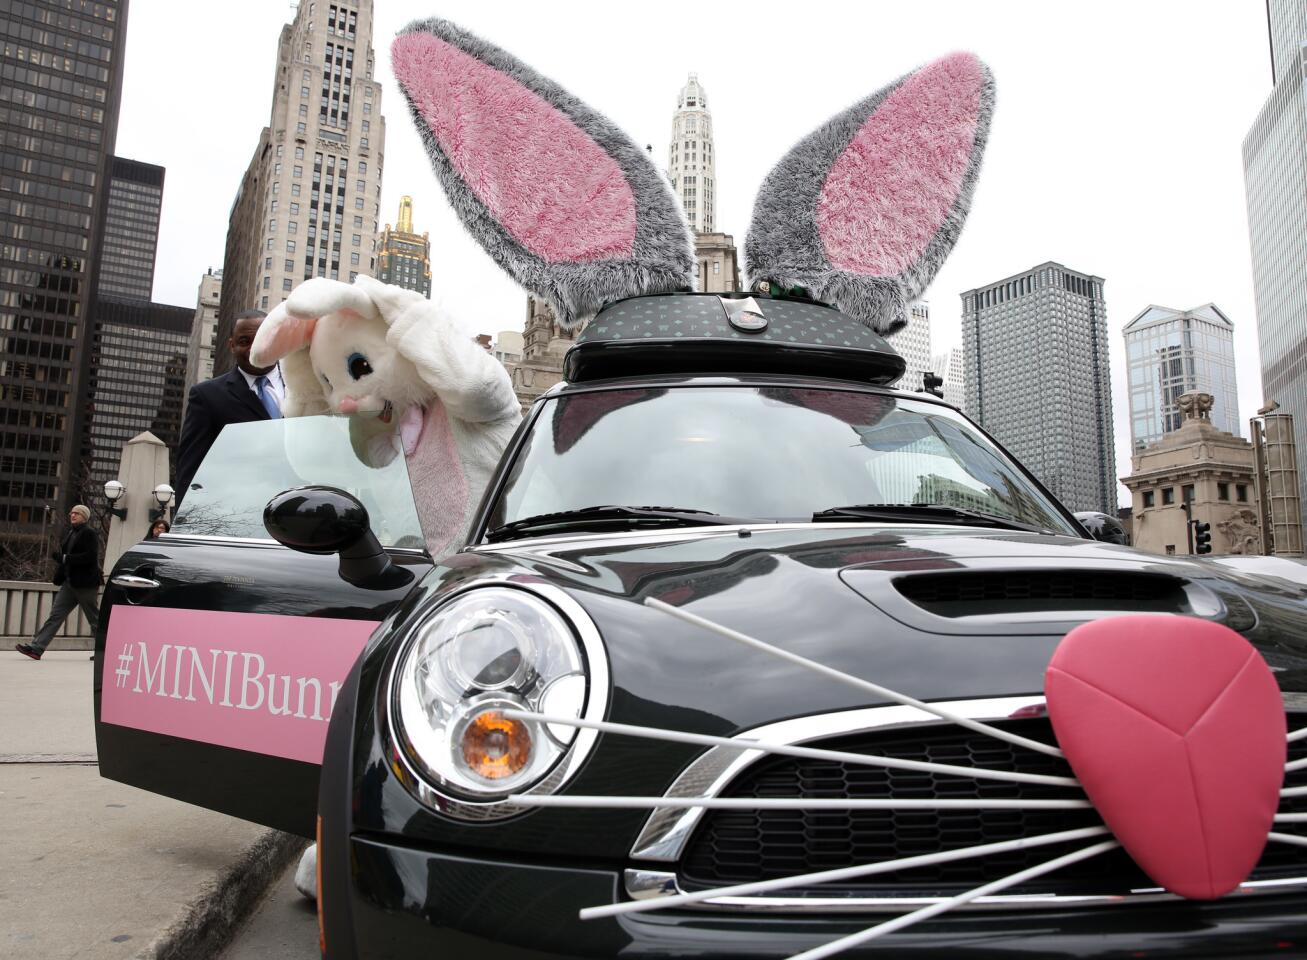 A local hotel dispatched a man in a rabbit suit to Pioneer Court in this bunny-themed Mini.